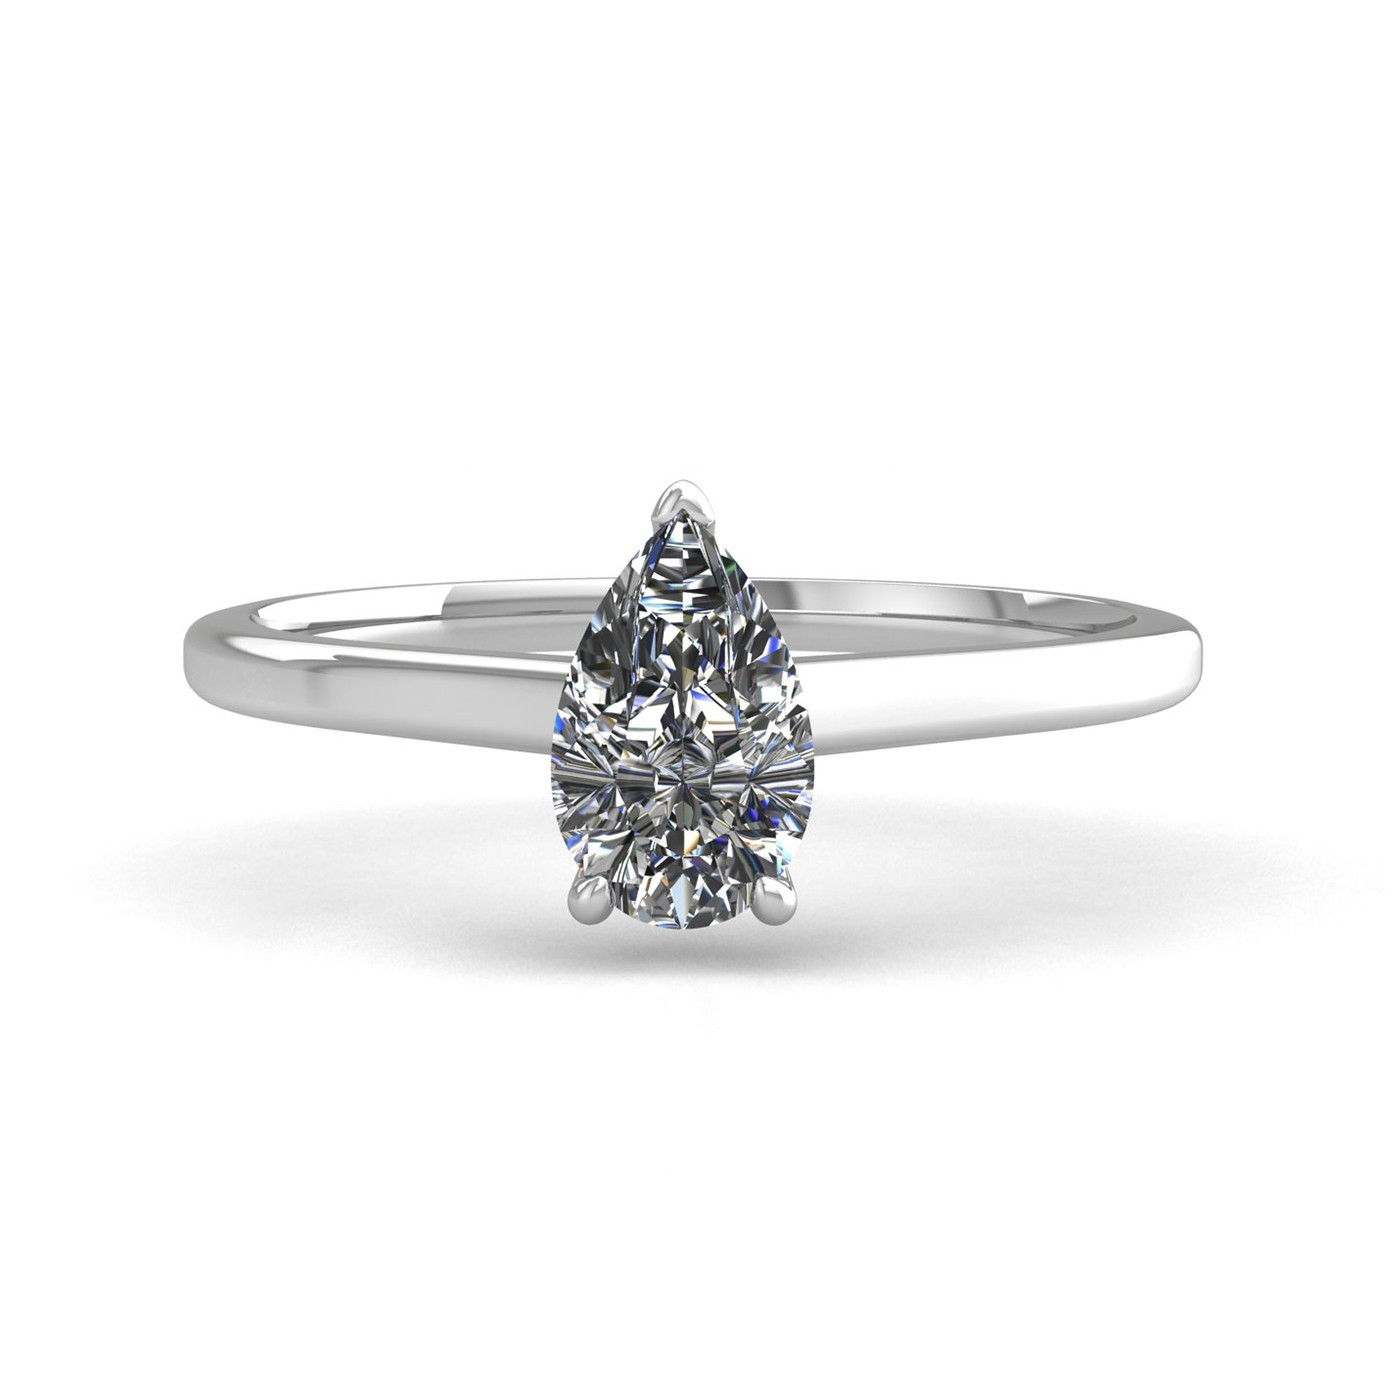 18k white gold  2,00 ct 3 prongs solitaire pear cut diamond engagement ring with whisper thin band Photos & images